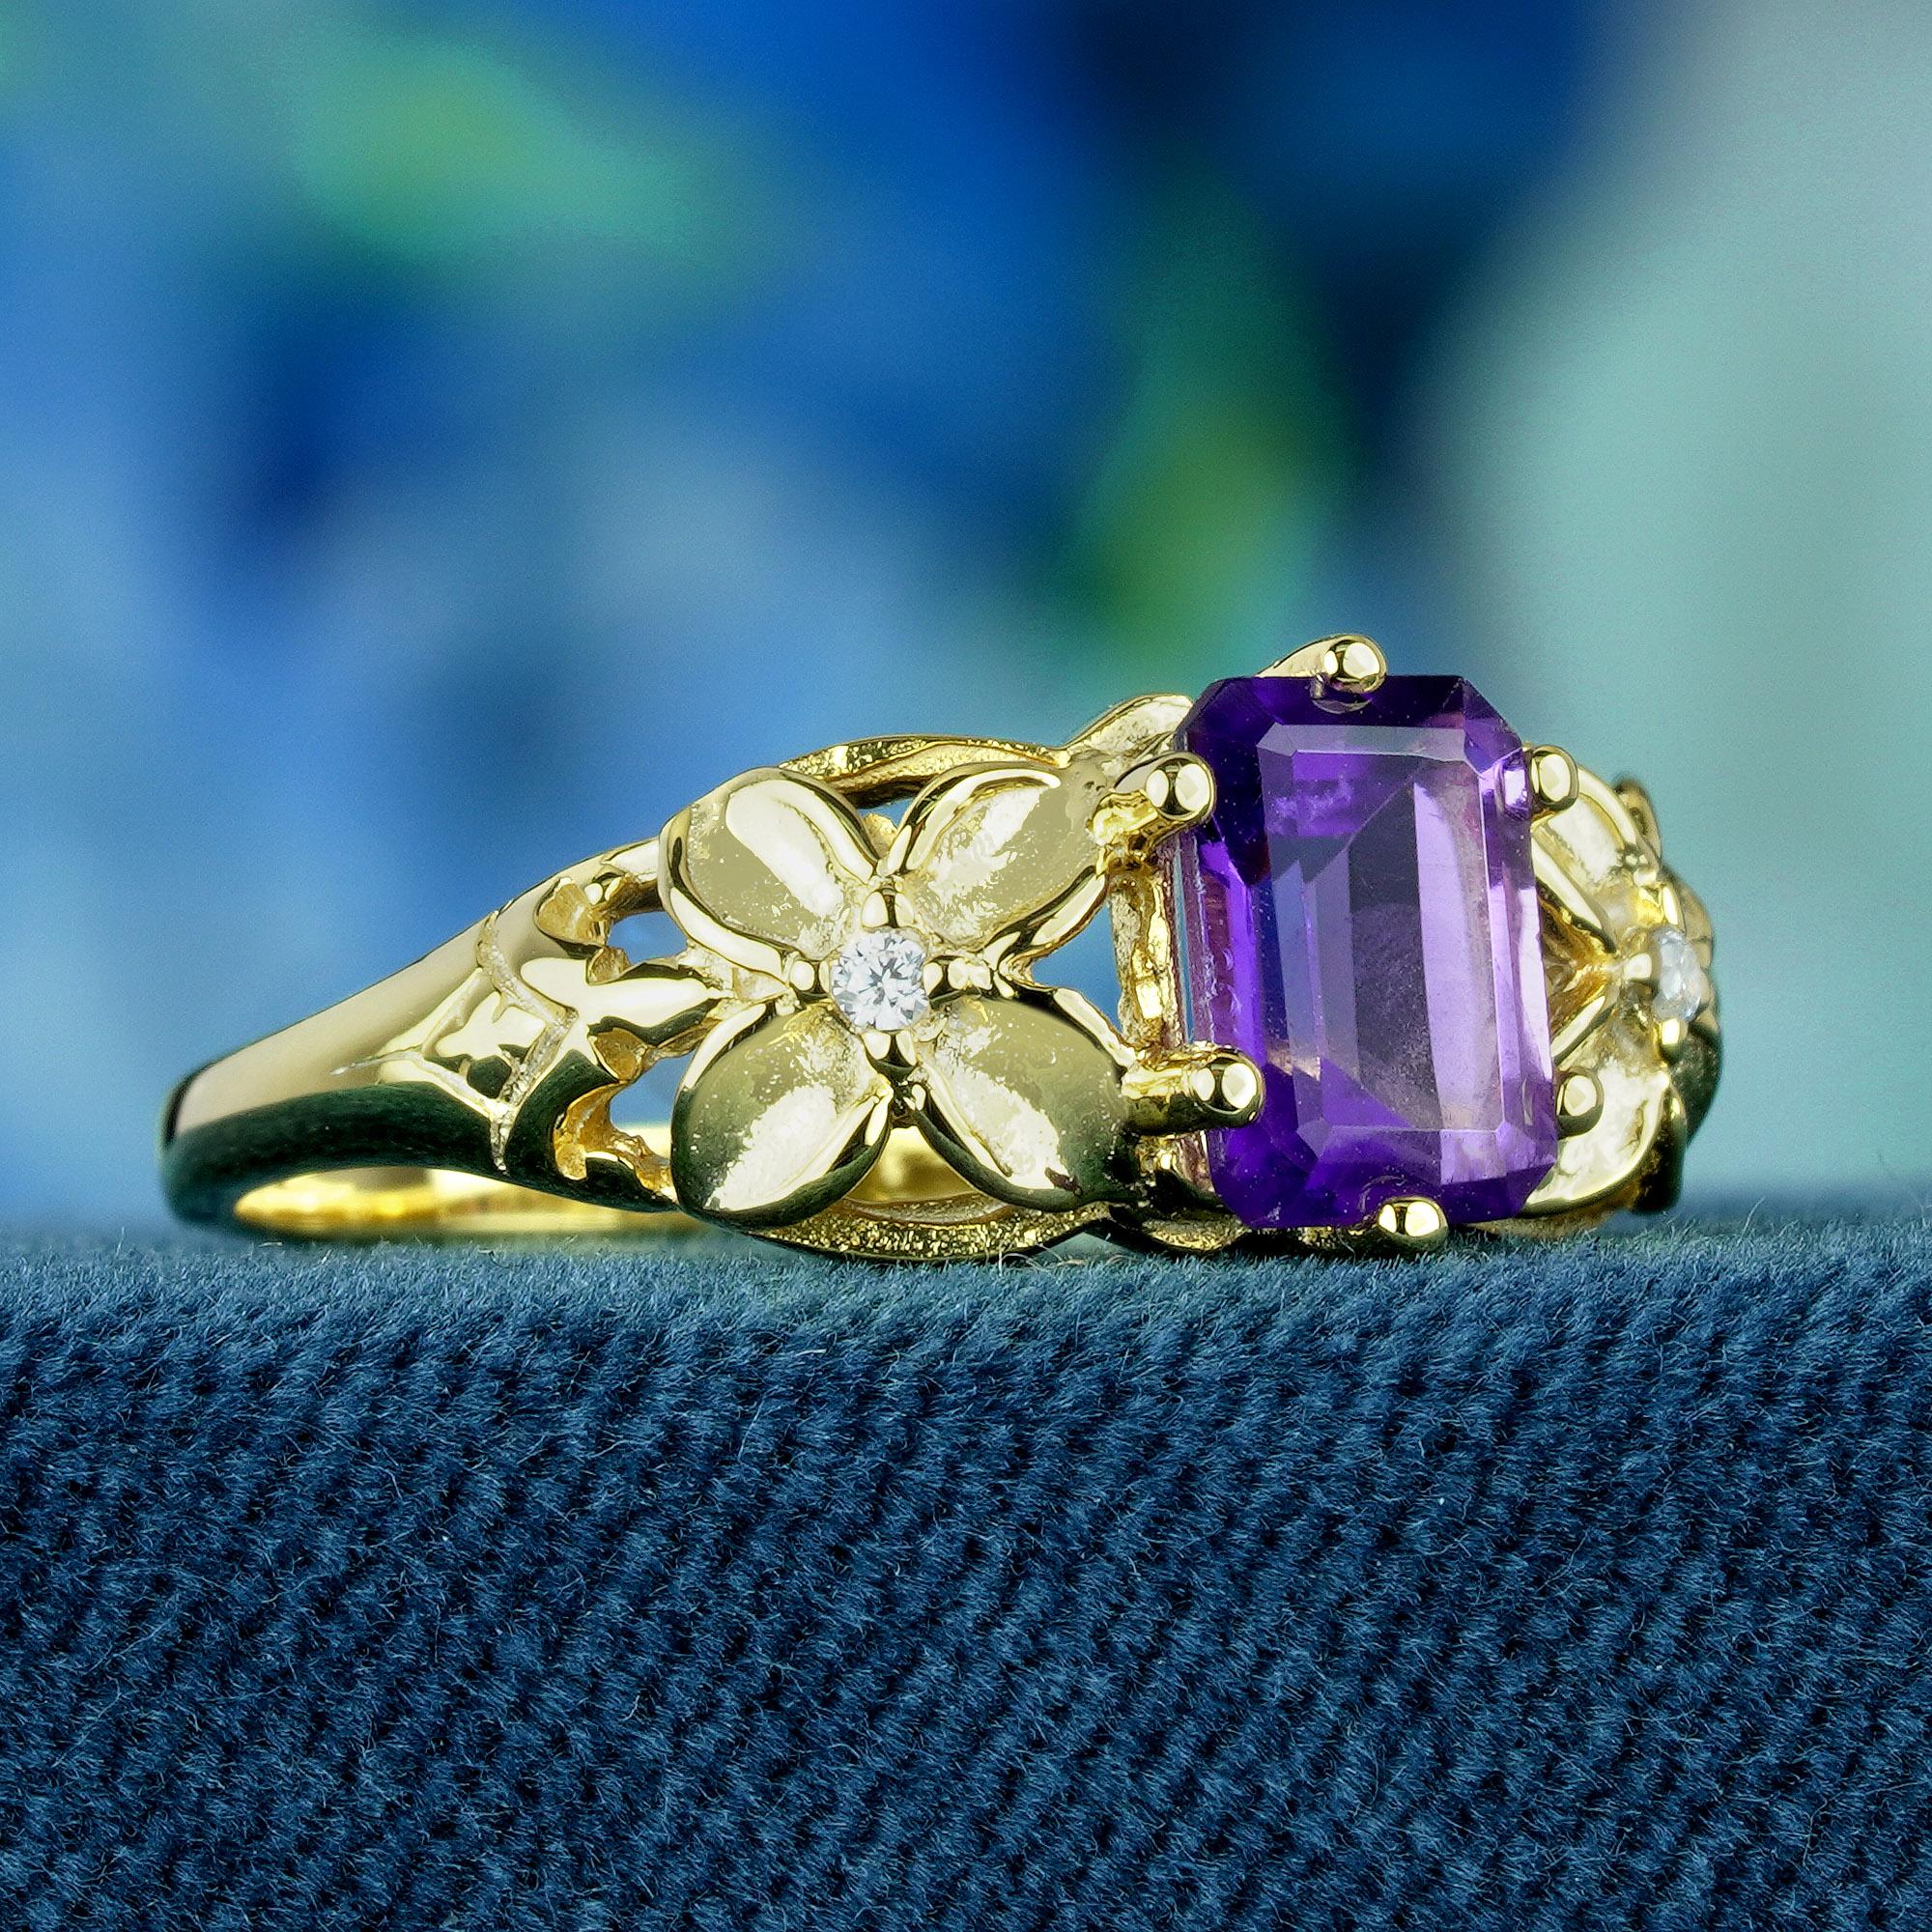 Discover the enchantment of our amethyst and diamond vintage style floral ring, meticulously crafted in yellow gold. Its elaborate floral pattern and sparkling diamonds promise to enchant, while the vivid purple emerald cut amethyst in prong setting